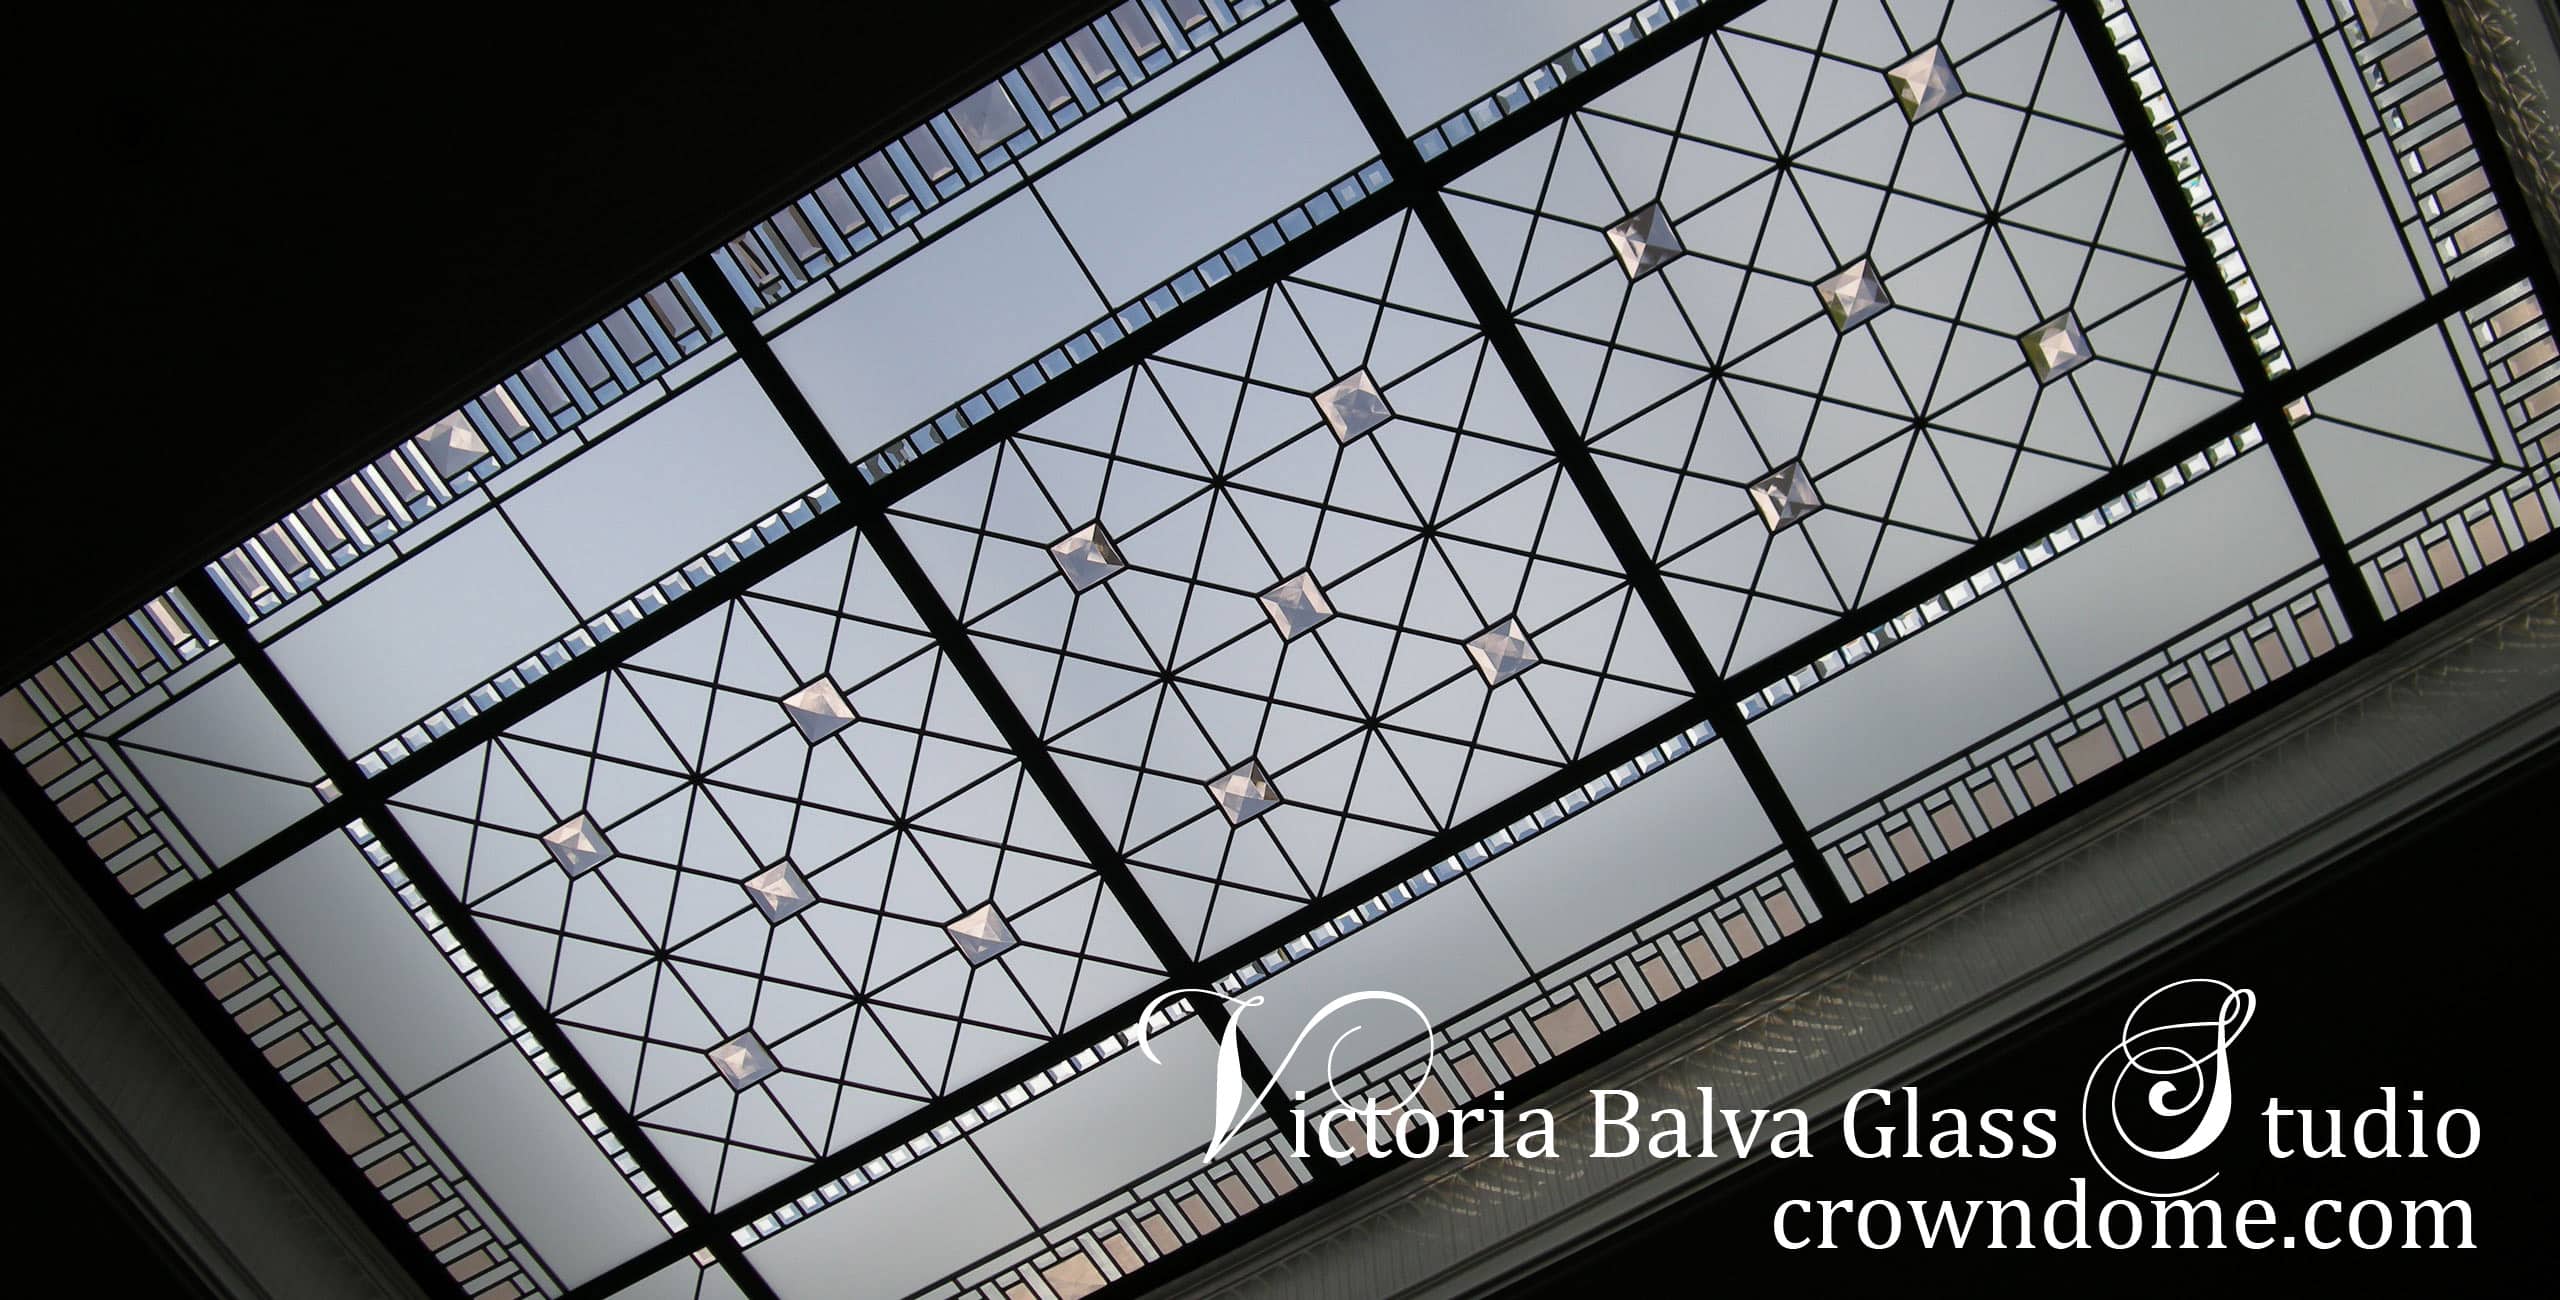 Large stained leaded glass skylight Barbini with delicate elusive colors of custom beveled glass and colored jewels. Intricate line work, clear textured glass, custom beled border, original stained leaded glass skylight design by architectural glass artist Victoria Balva